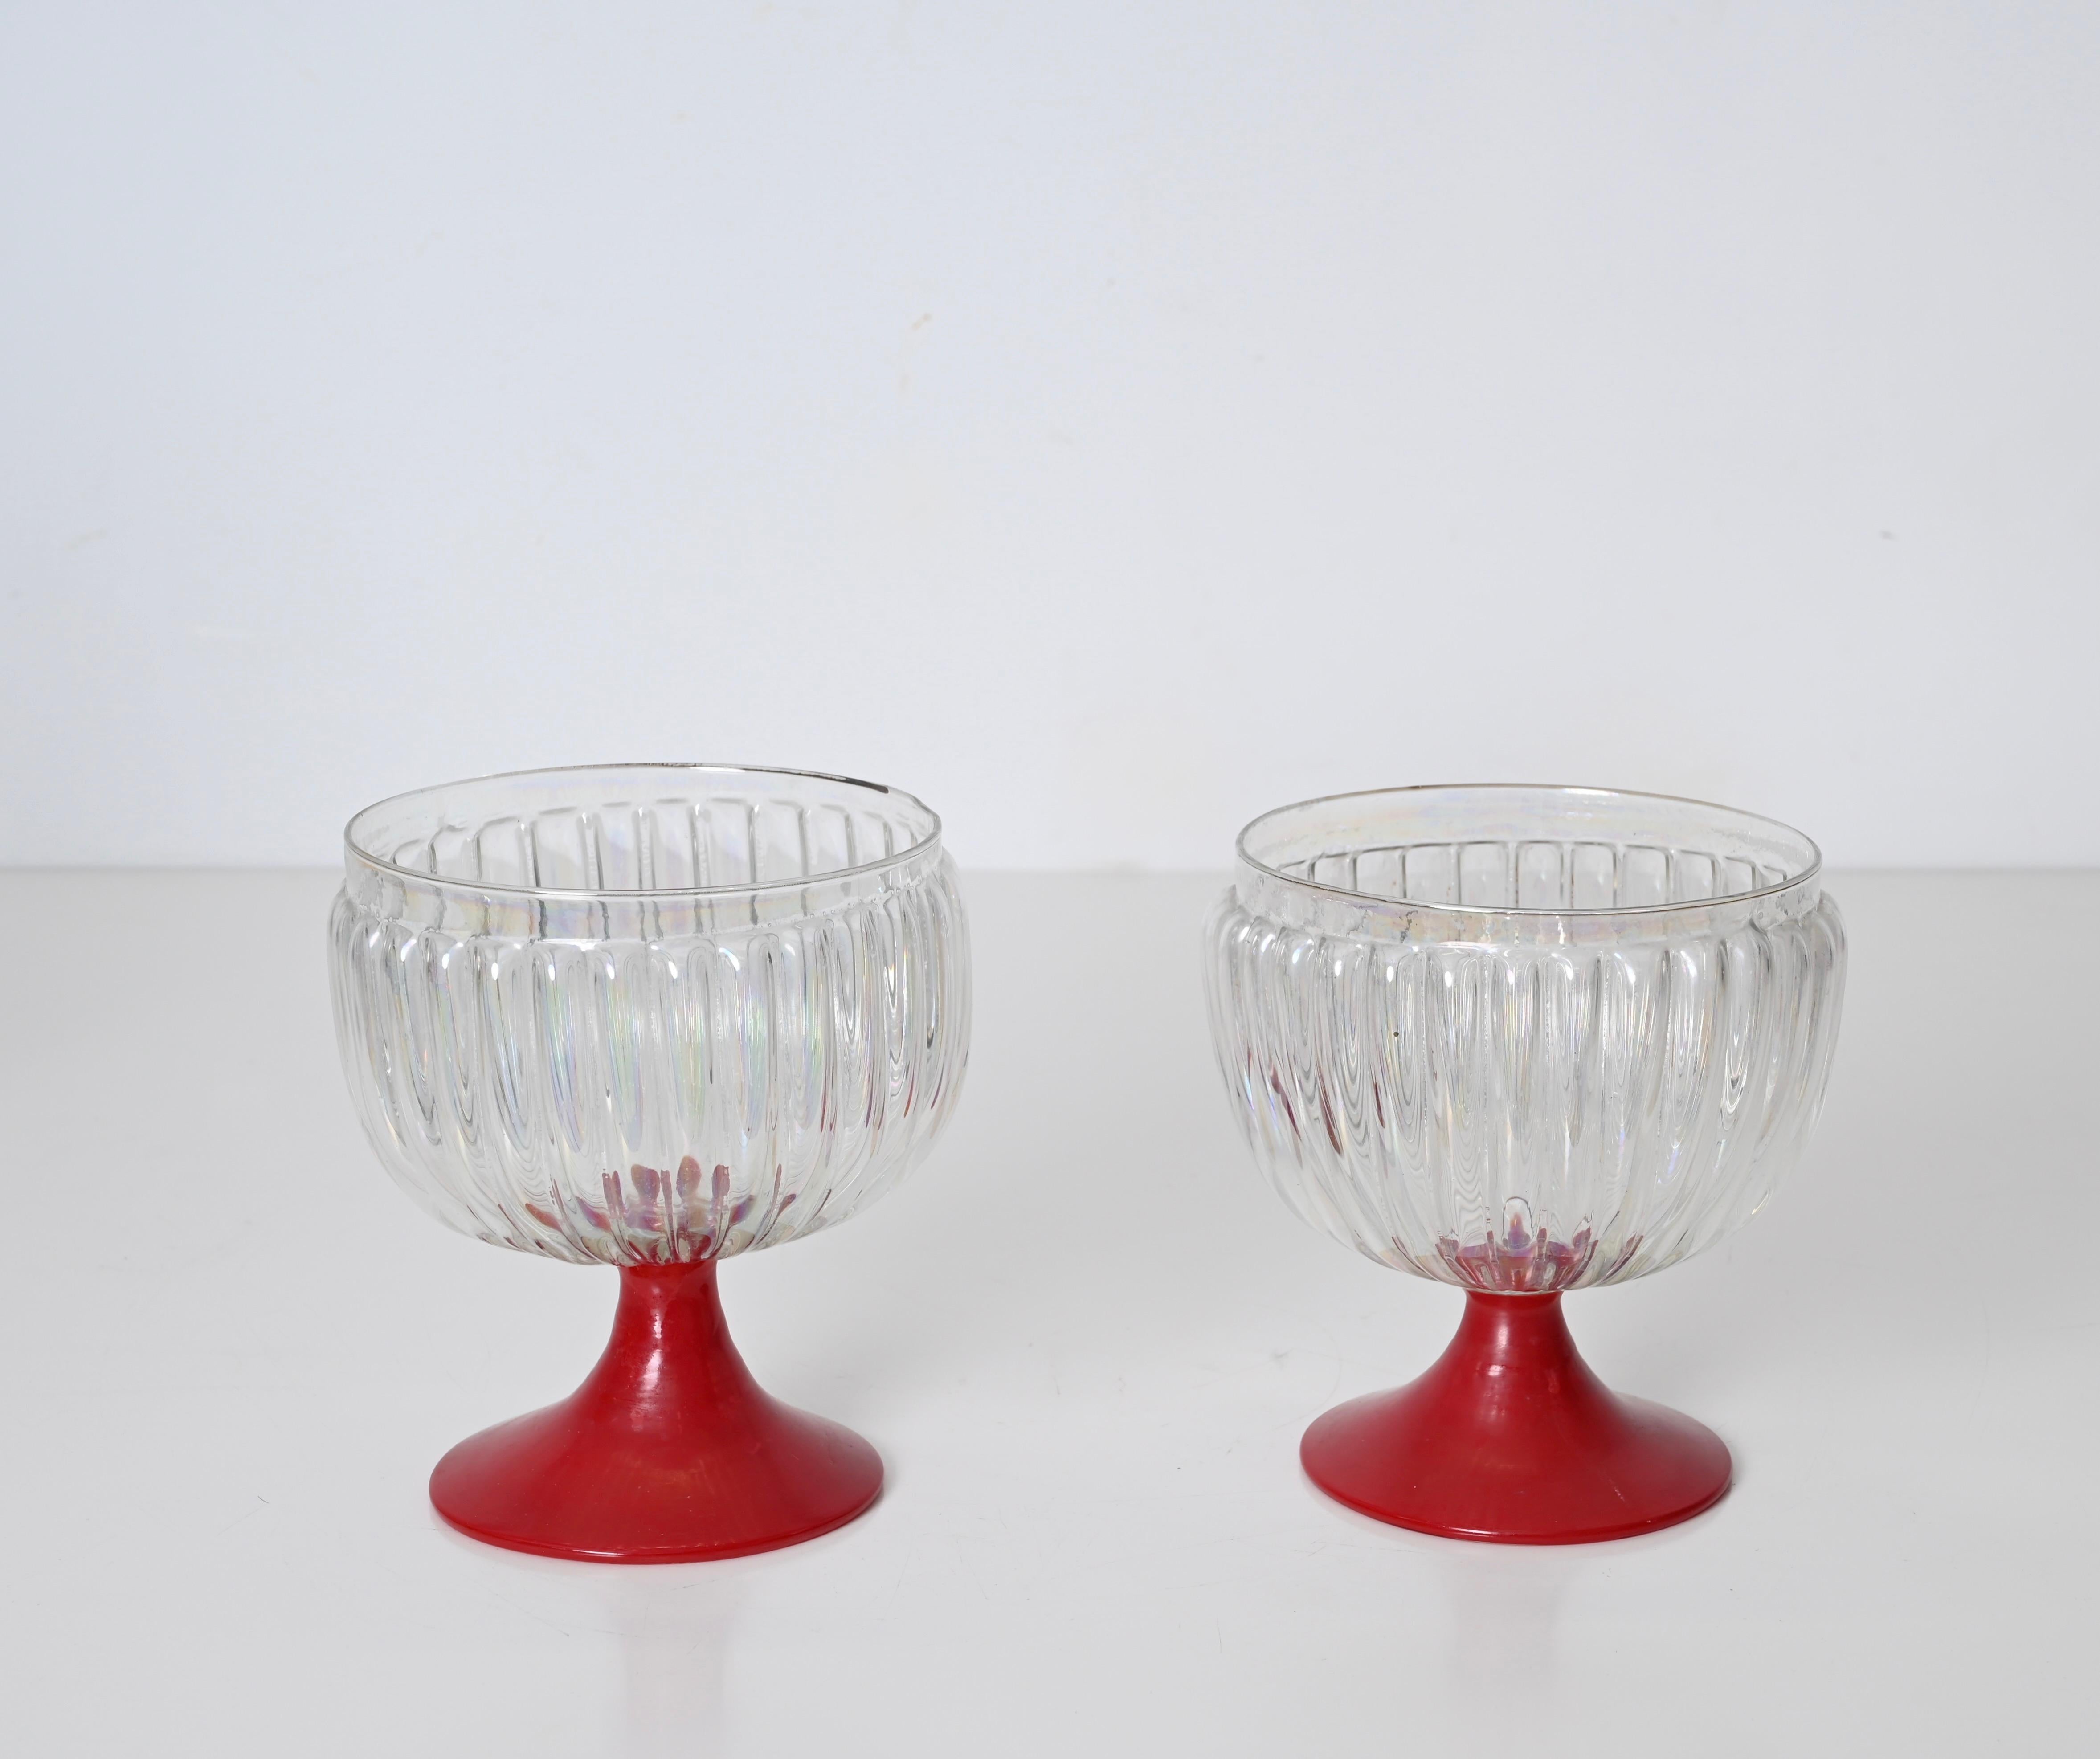 Pair of Large Decorative Murano Red and Iridescent Goblet Glasses, Italy 1940s For Sale 6